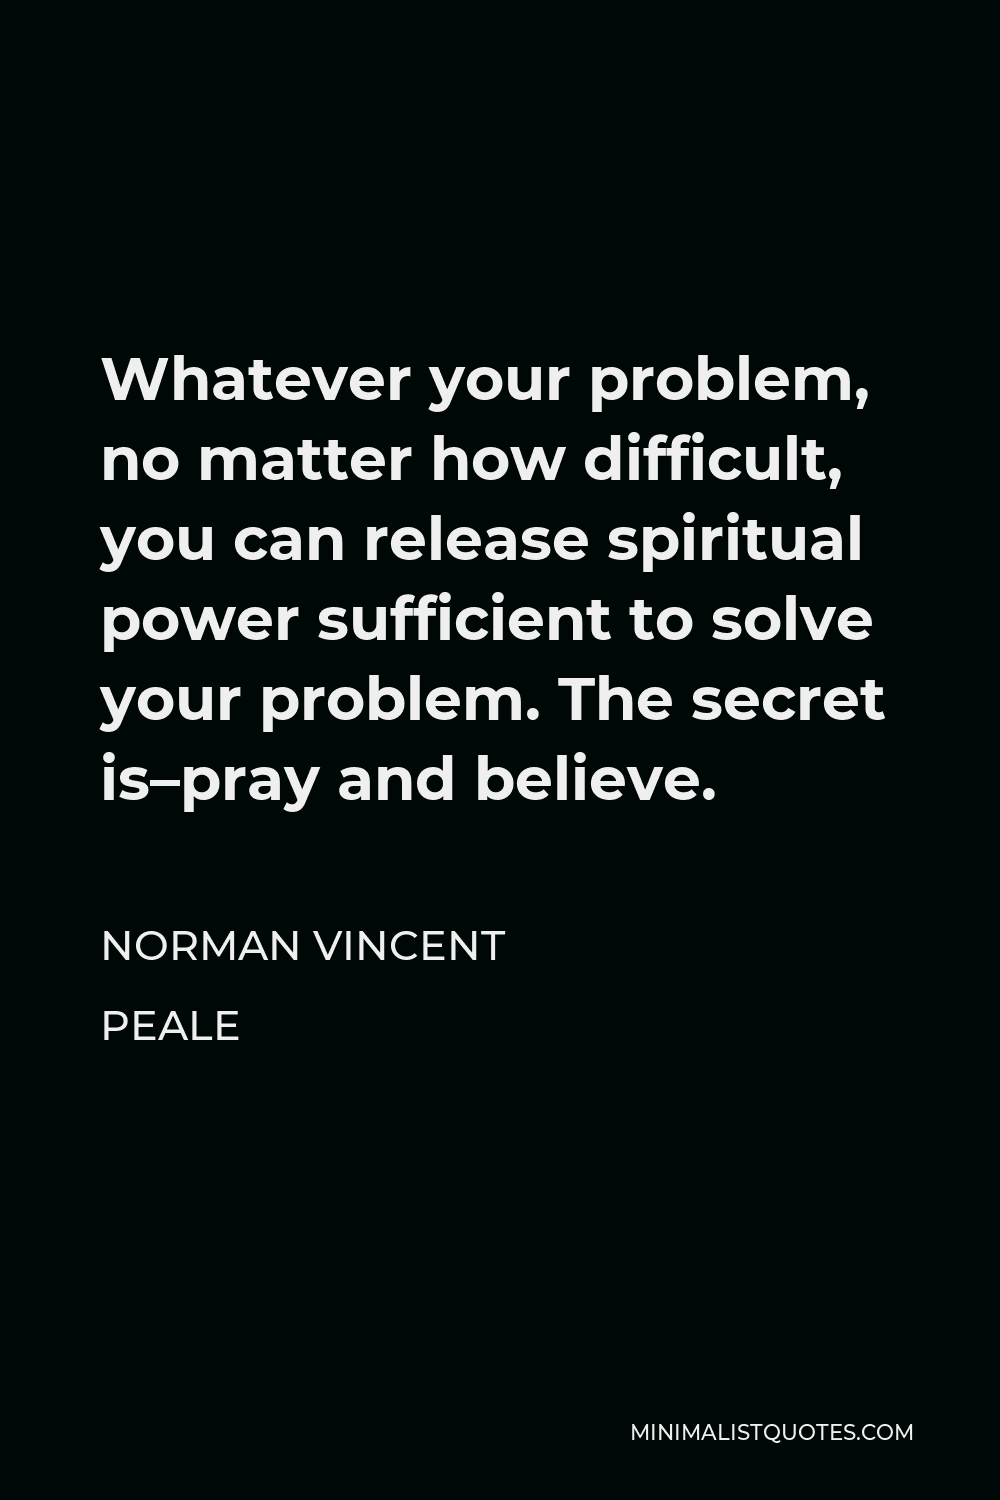 Norman Vincent Peale Quote - Whatever your problem, no matter how difficult, you can release spiritual power sufficient to solve your problem. The secret is–pray and believe.